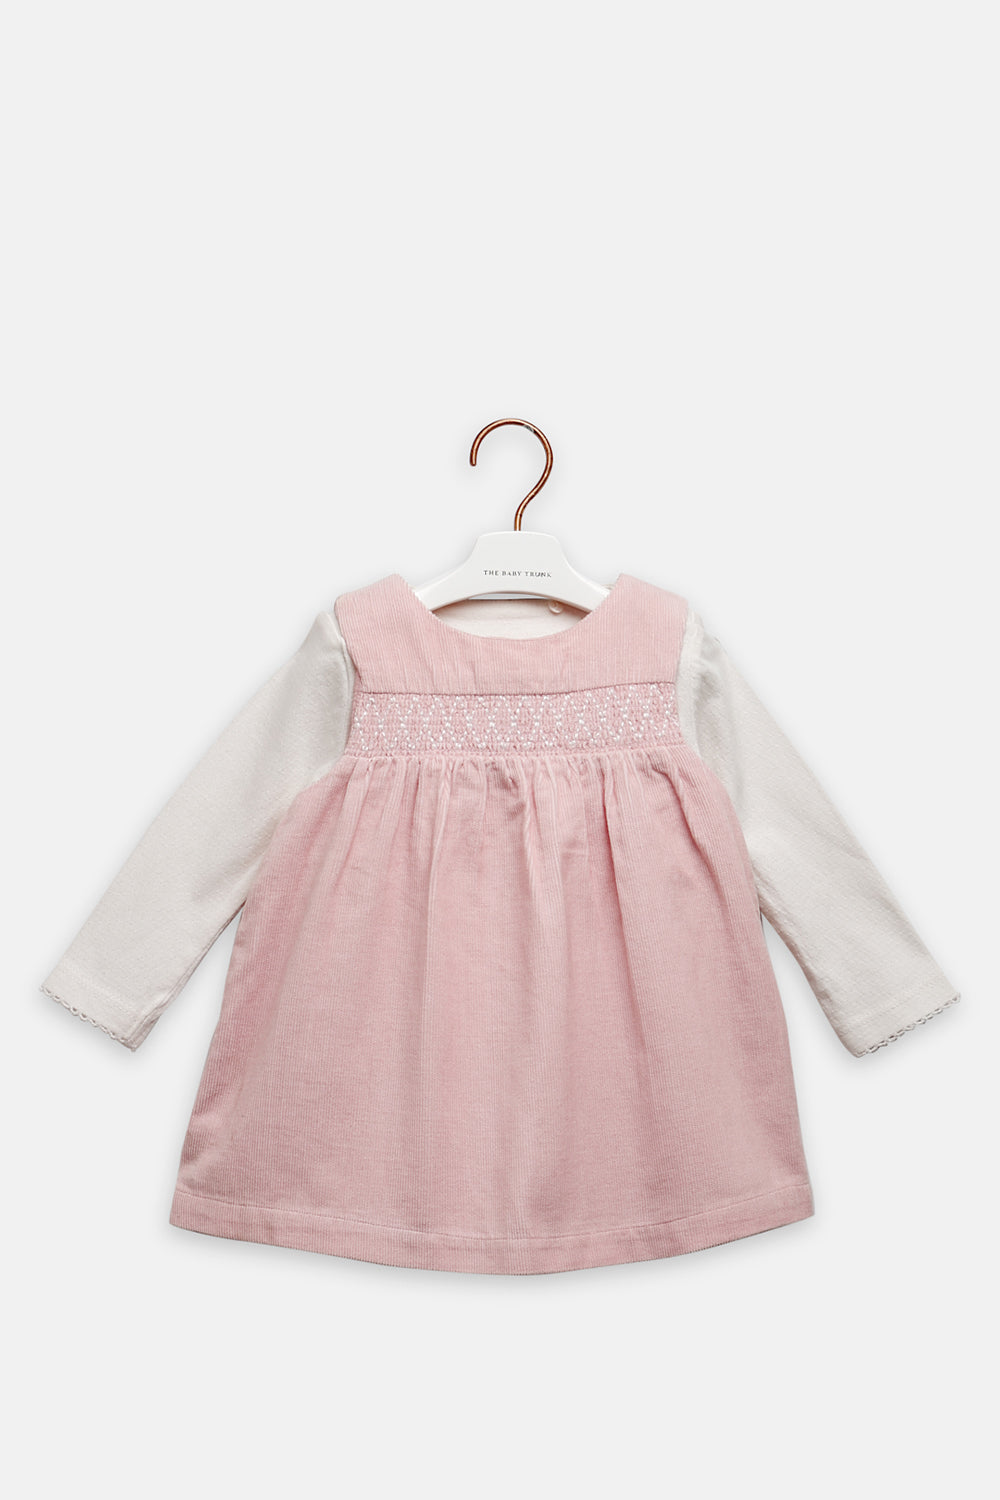 Baby Pink Winter Cotton Frock Set